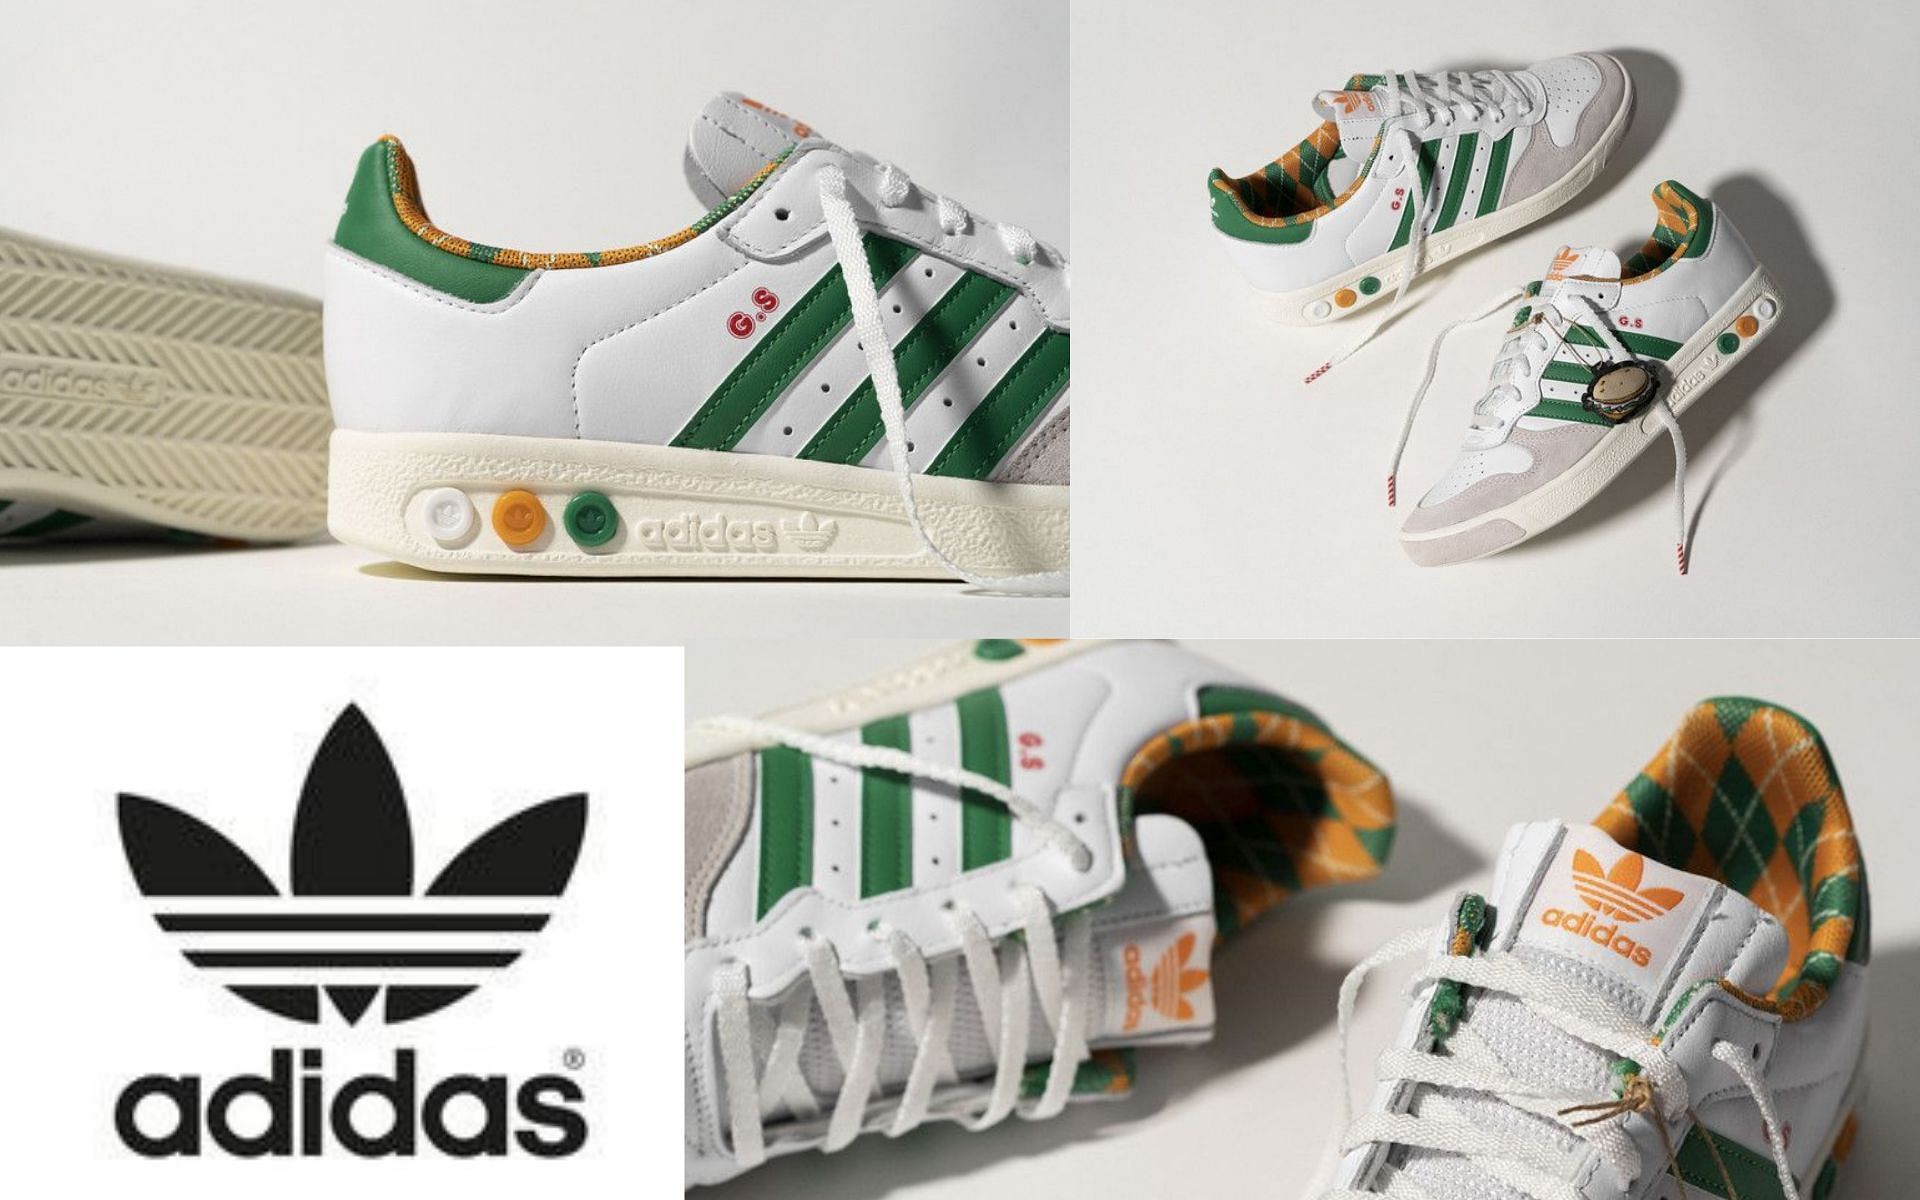 Adidas Grand Slam sneakers: Where to buy, price and more